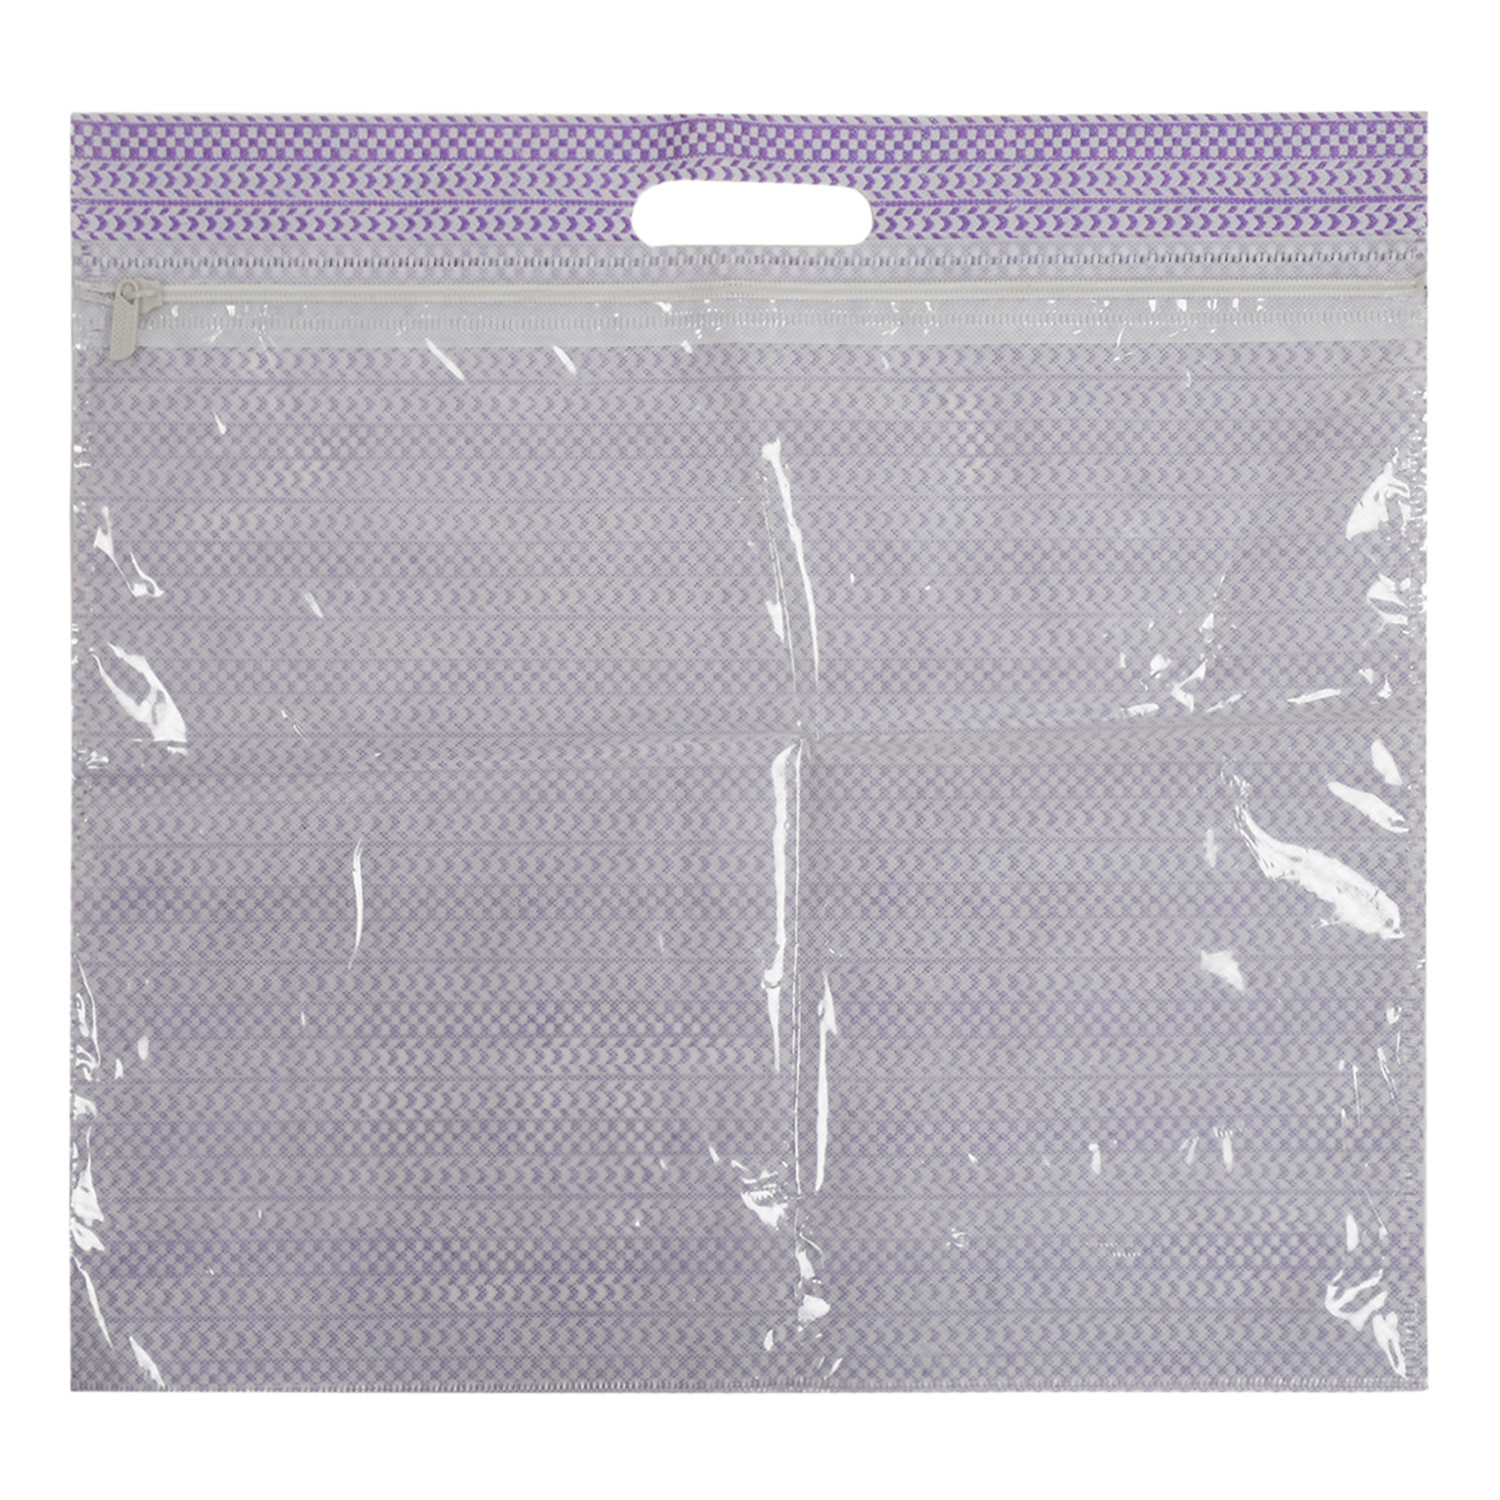 Kuber Industries Non-Woven Single Saree Covers With Transparent Window With Handle(Purple)